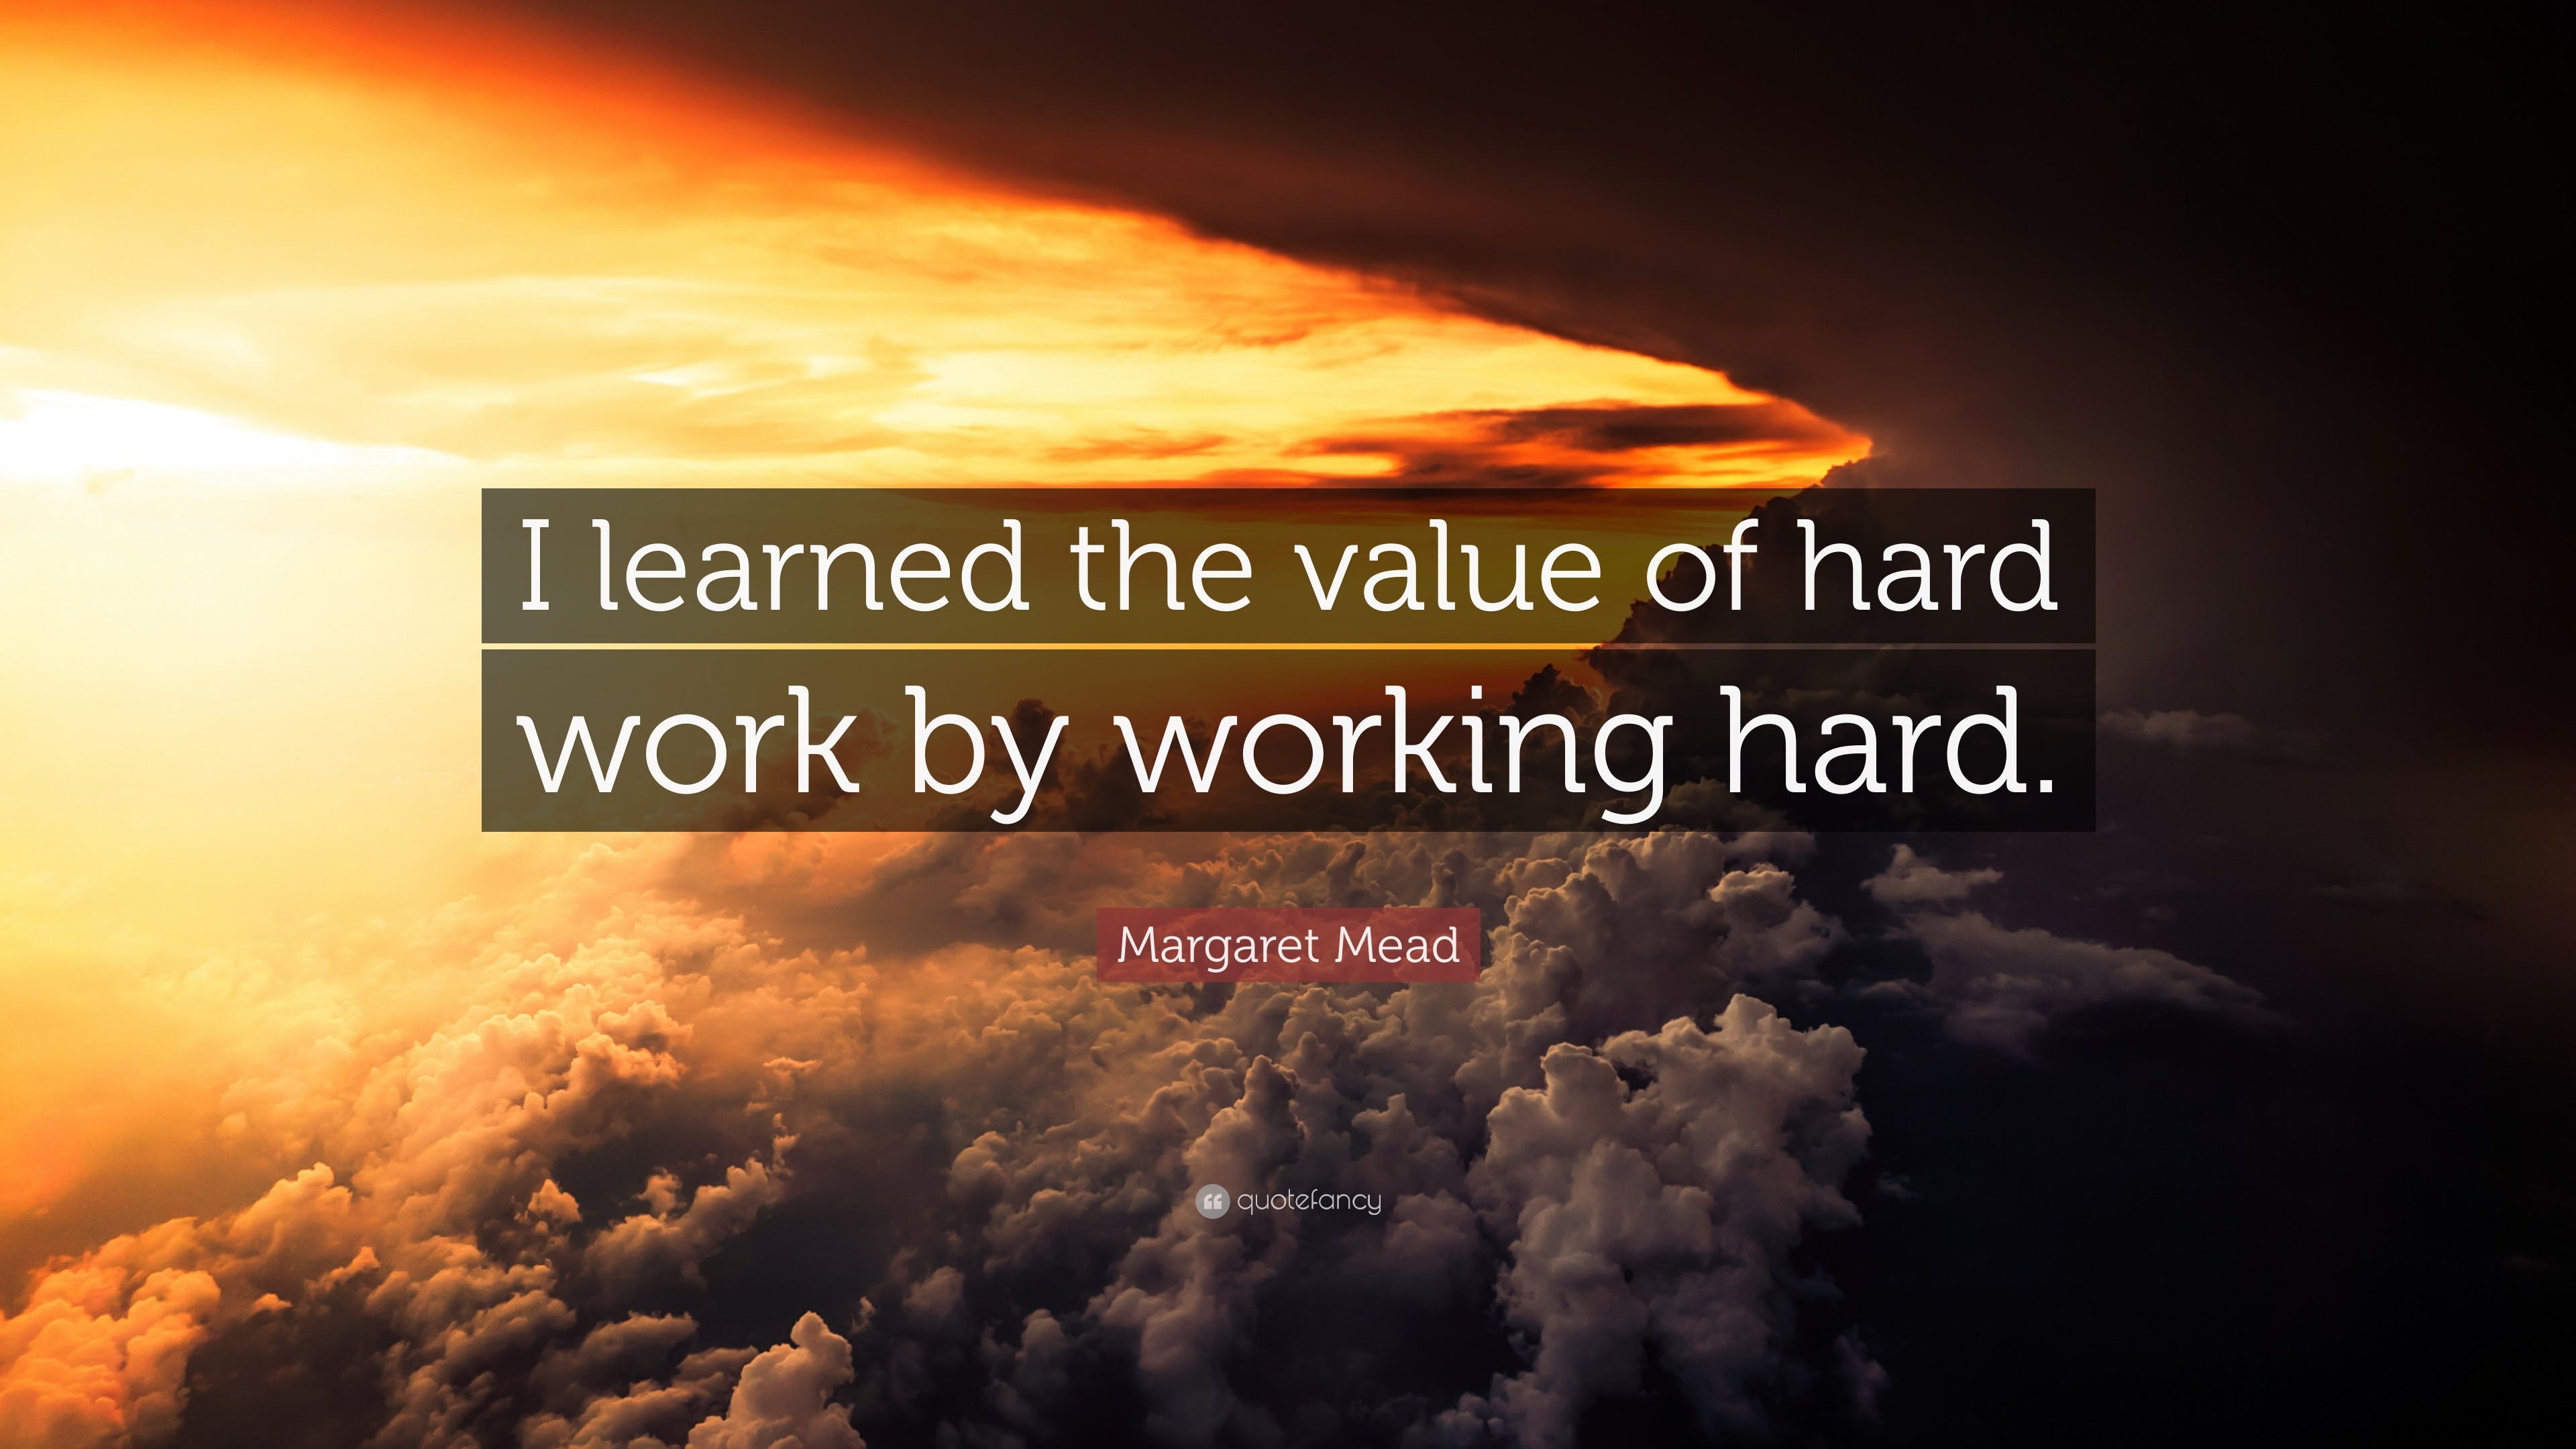 Margaret Mead Quote: “I learned the value of hard work by working hard.”